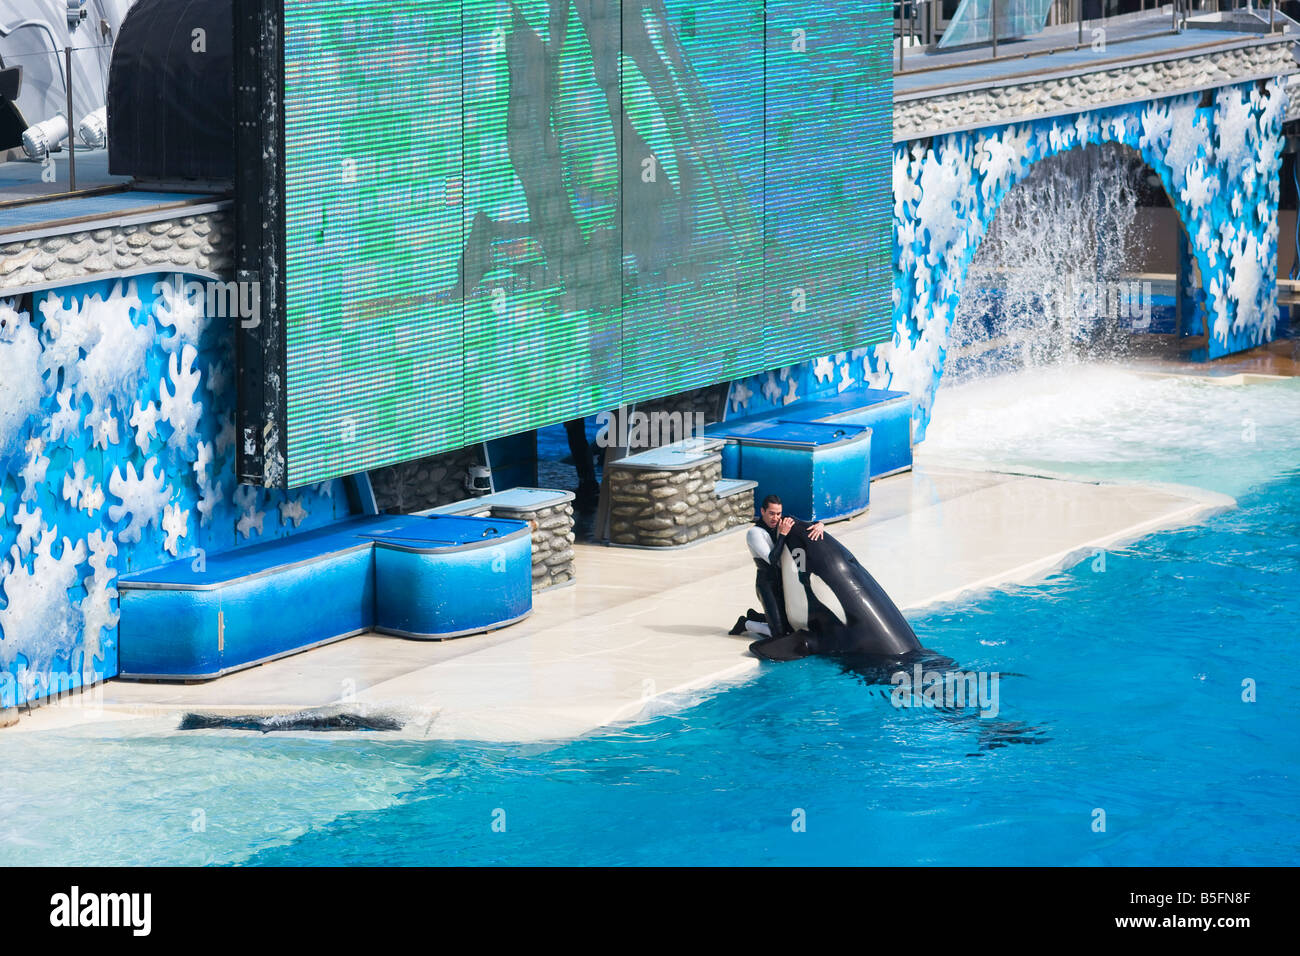 Whale trainer interacting with Shamu at SeaWorld. Stock Photo